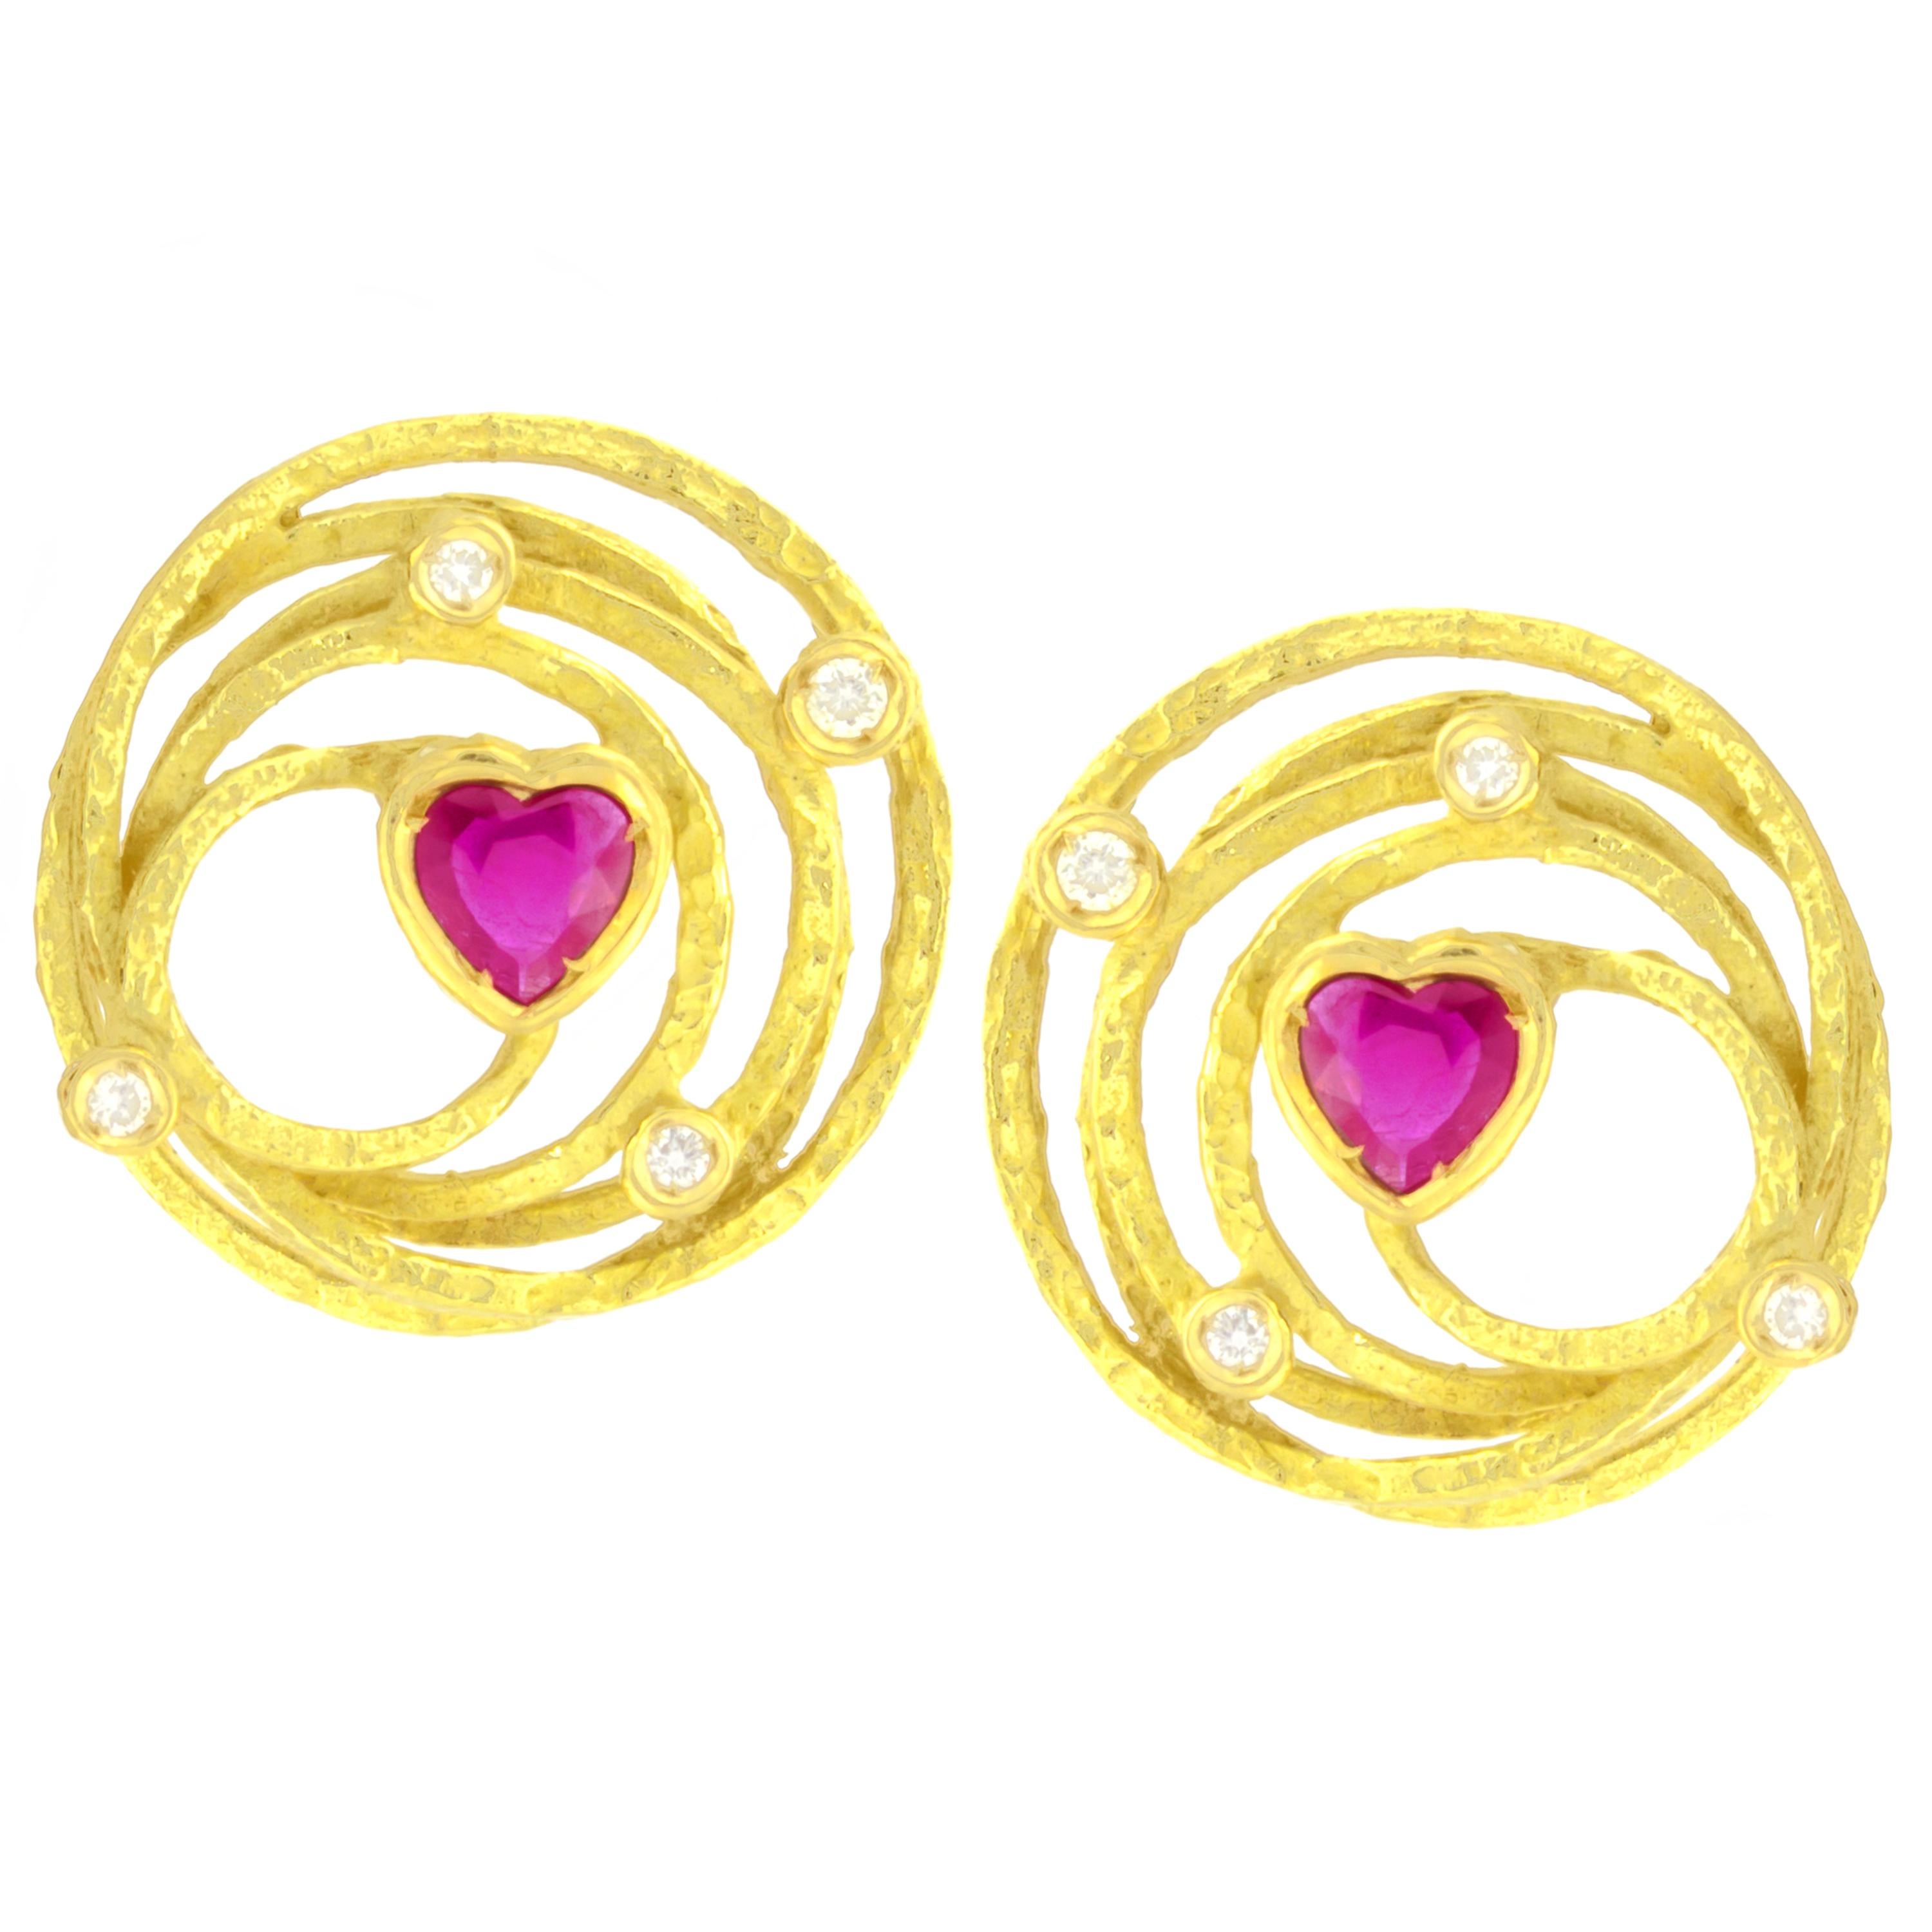 Sacchi Universe Heart Ruby and Diamonds Gemstones 18 Karat Yellow Gold Earrings For Sale